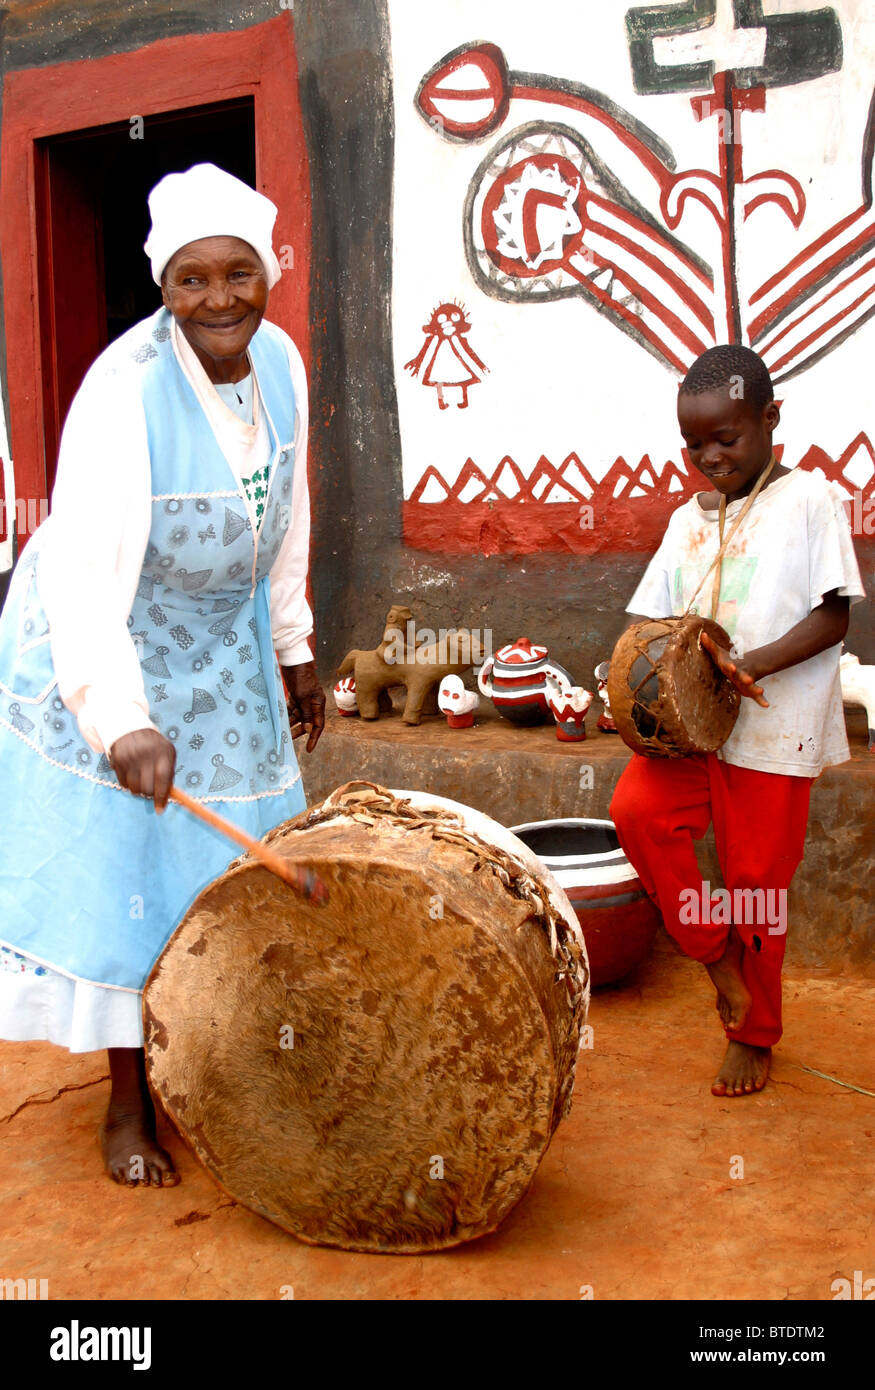 A black Venda woman and small boy beating drums outside a building with mural on the wall and hand made crafts on display Stock Photo